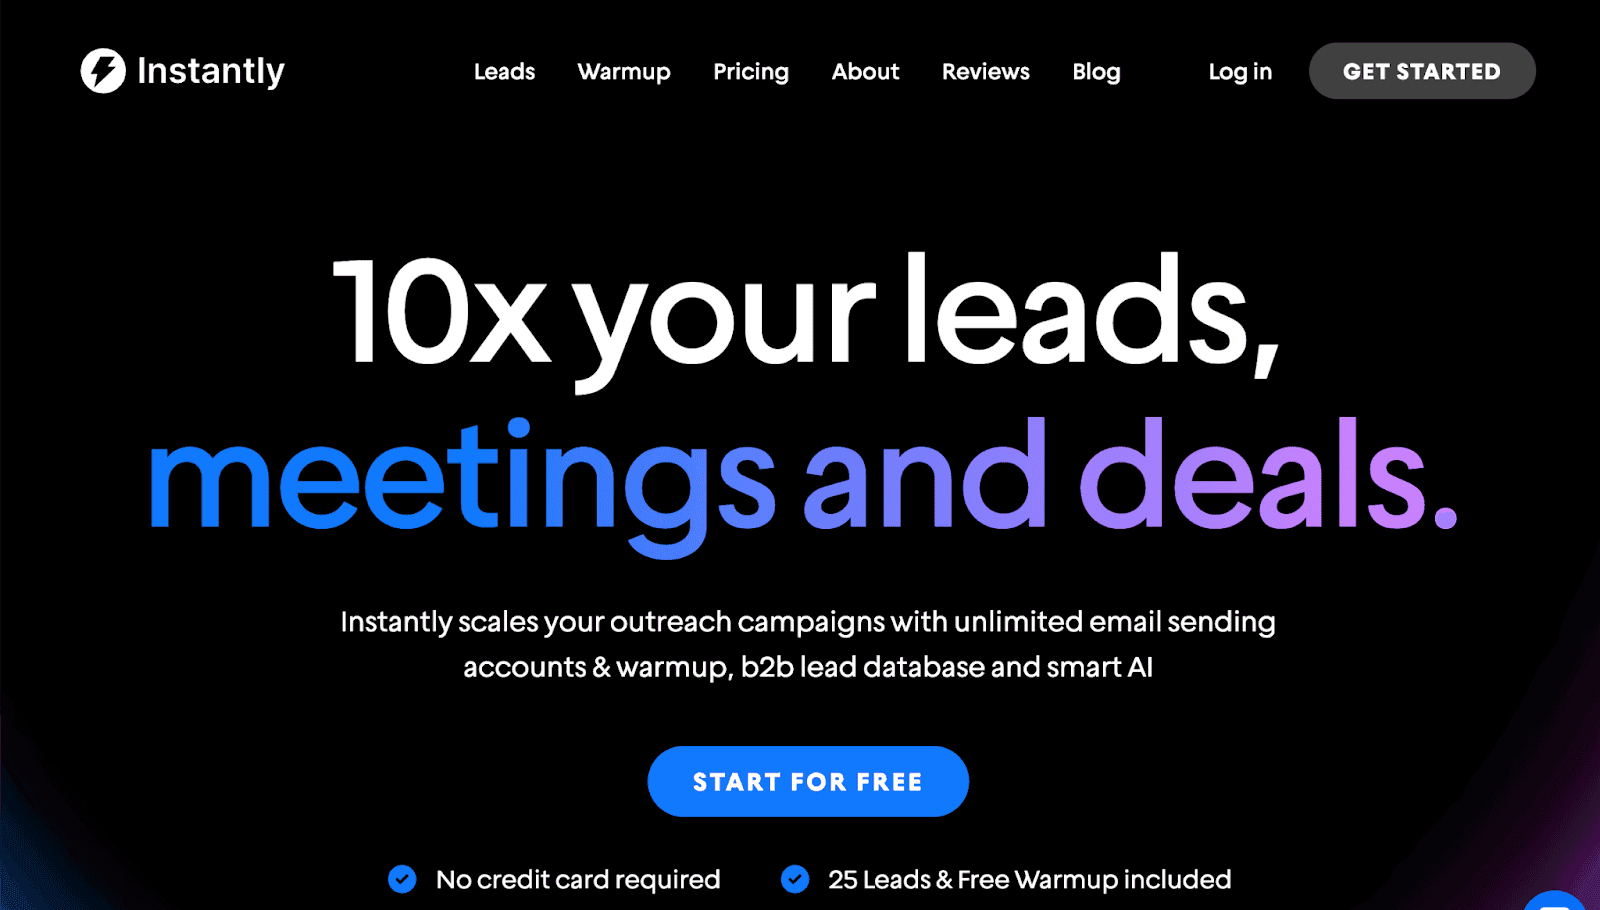 Instantly webpage - 10x your leads, meetings and deals